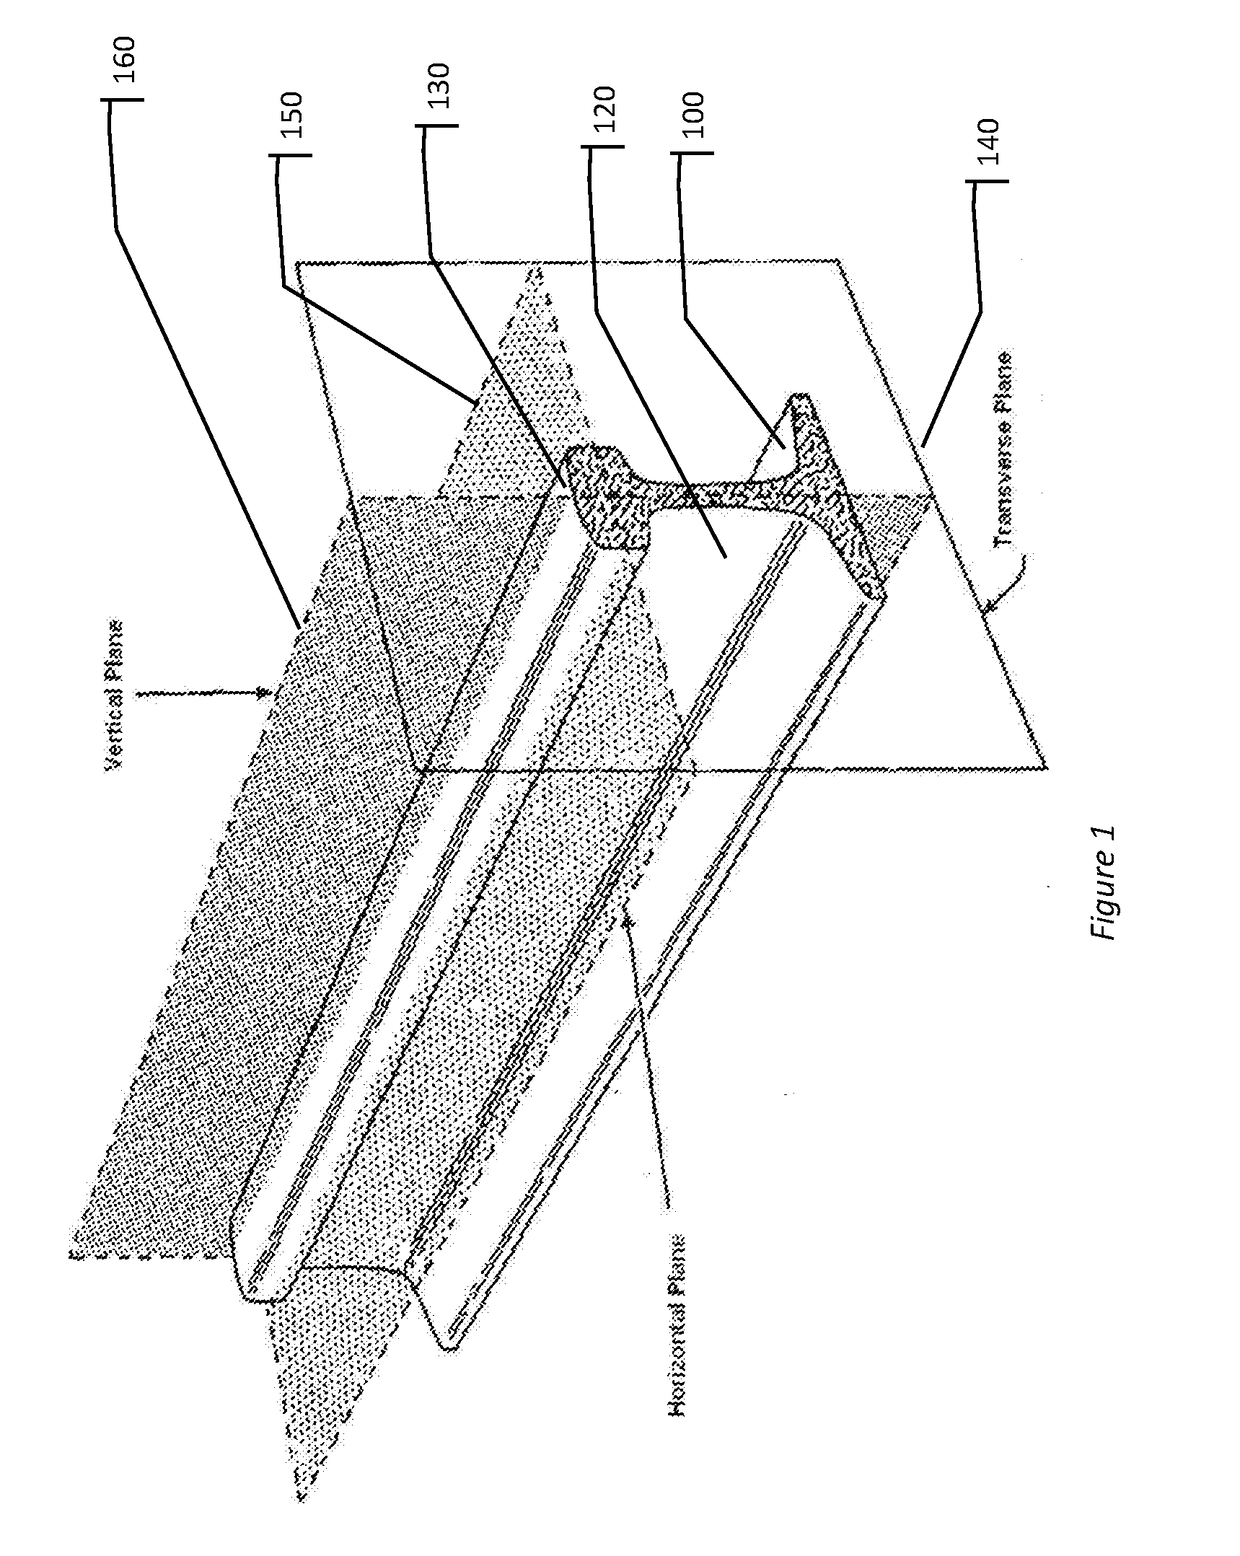 Combined Passive and Active Method and Systems to Detect and Measure Internal Flaws within Metal Rails